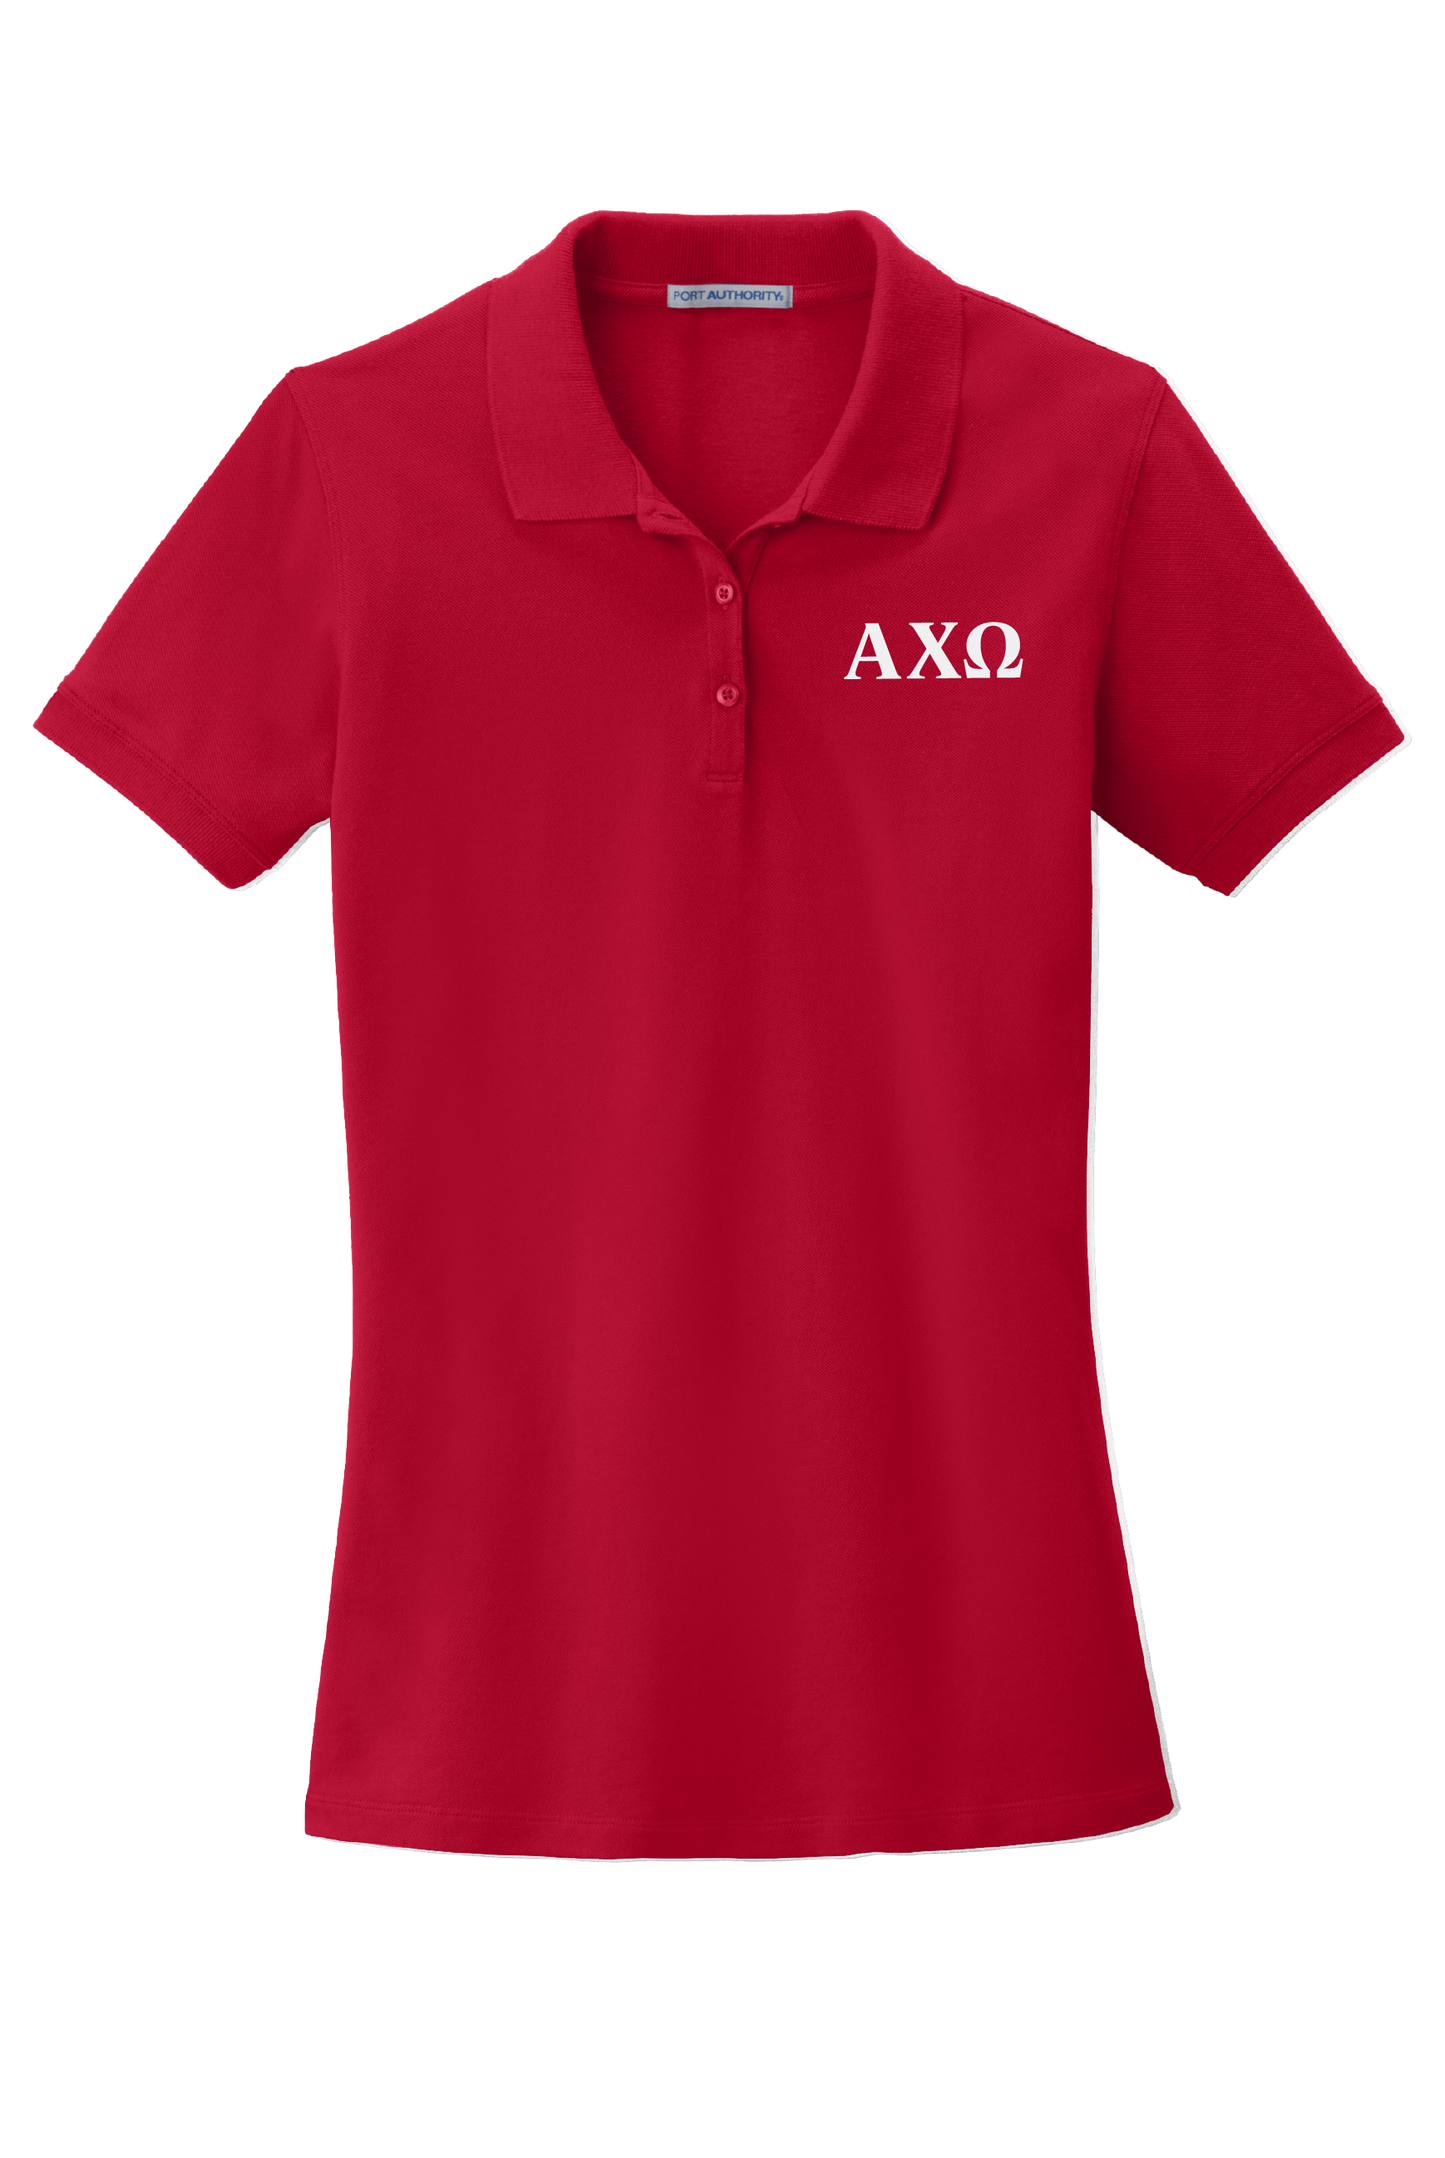 Alpha Chi Omega Ladies' Embroidered Polo Shirt